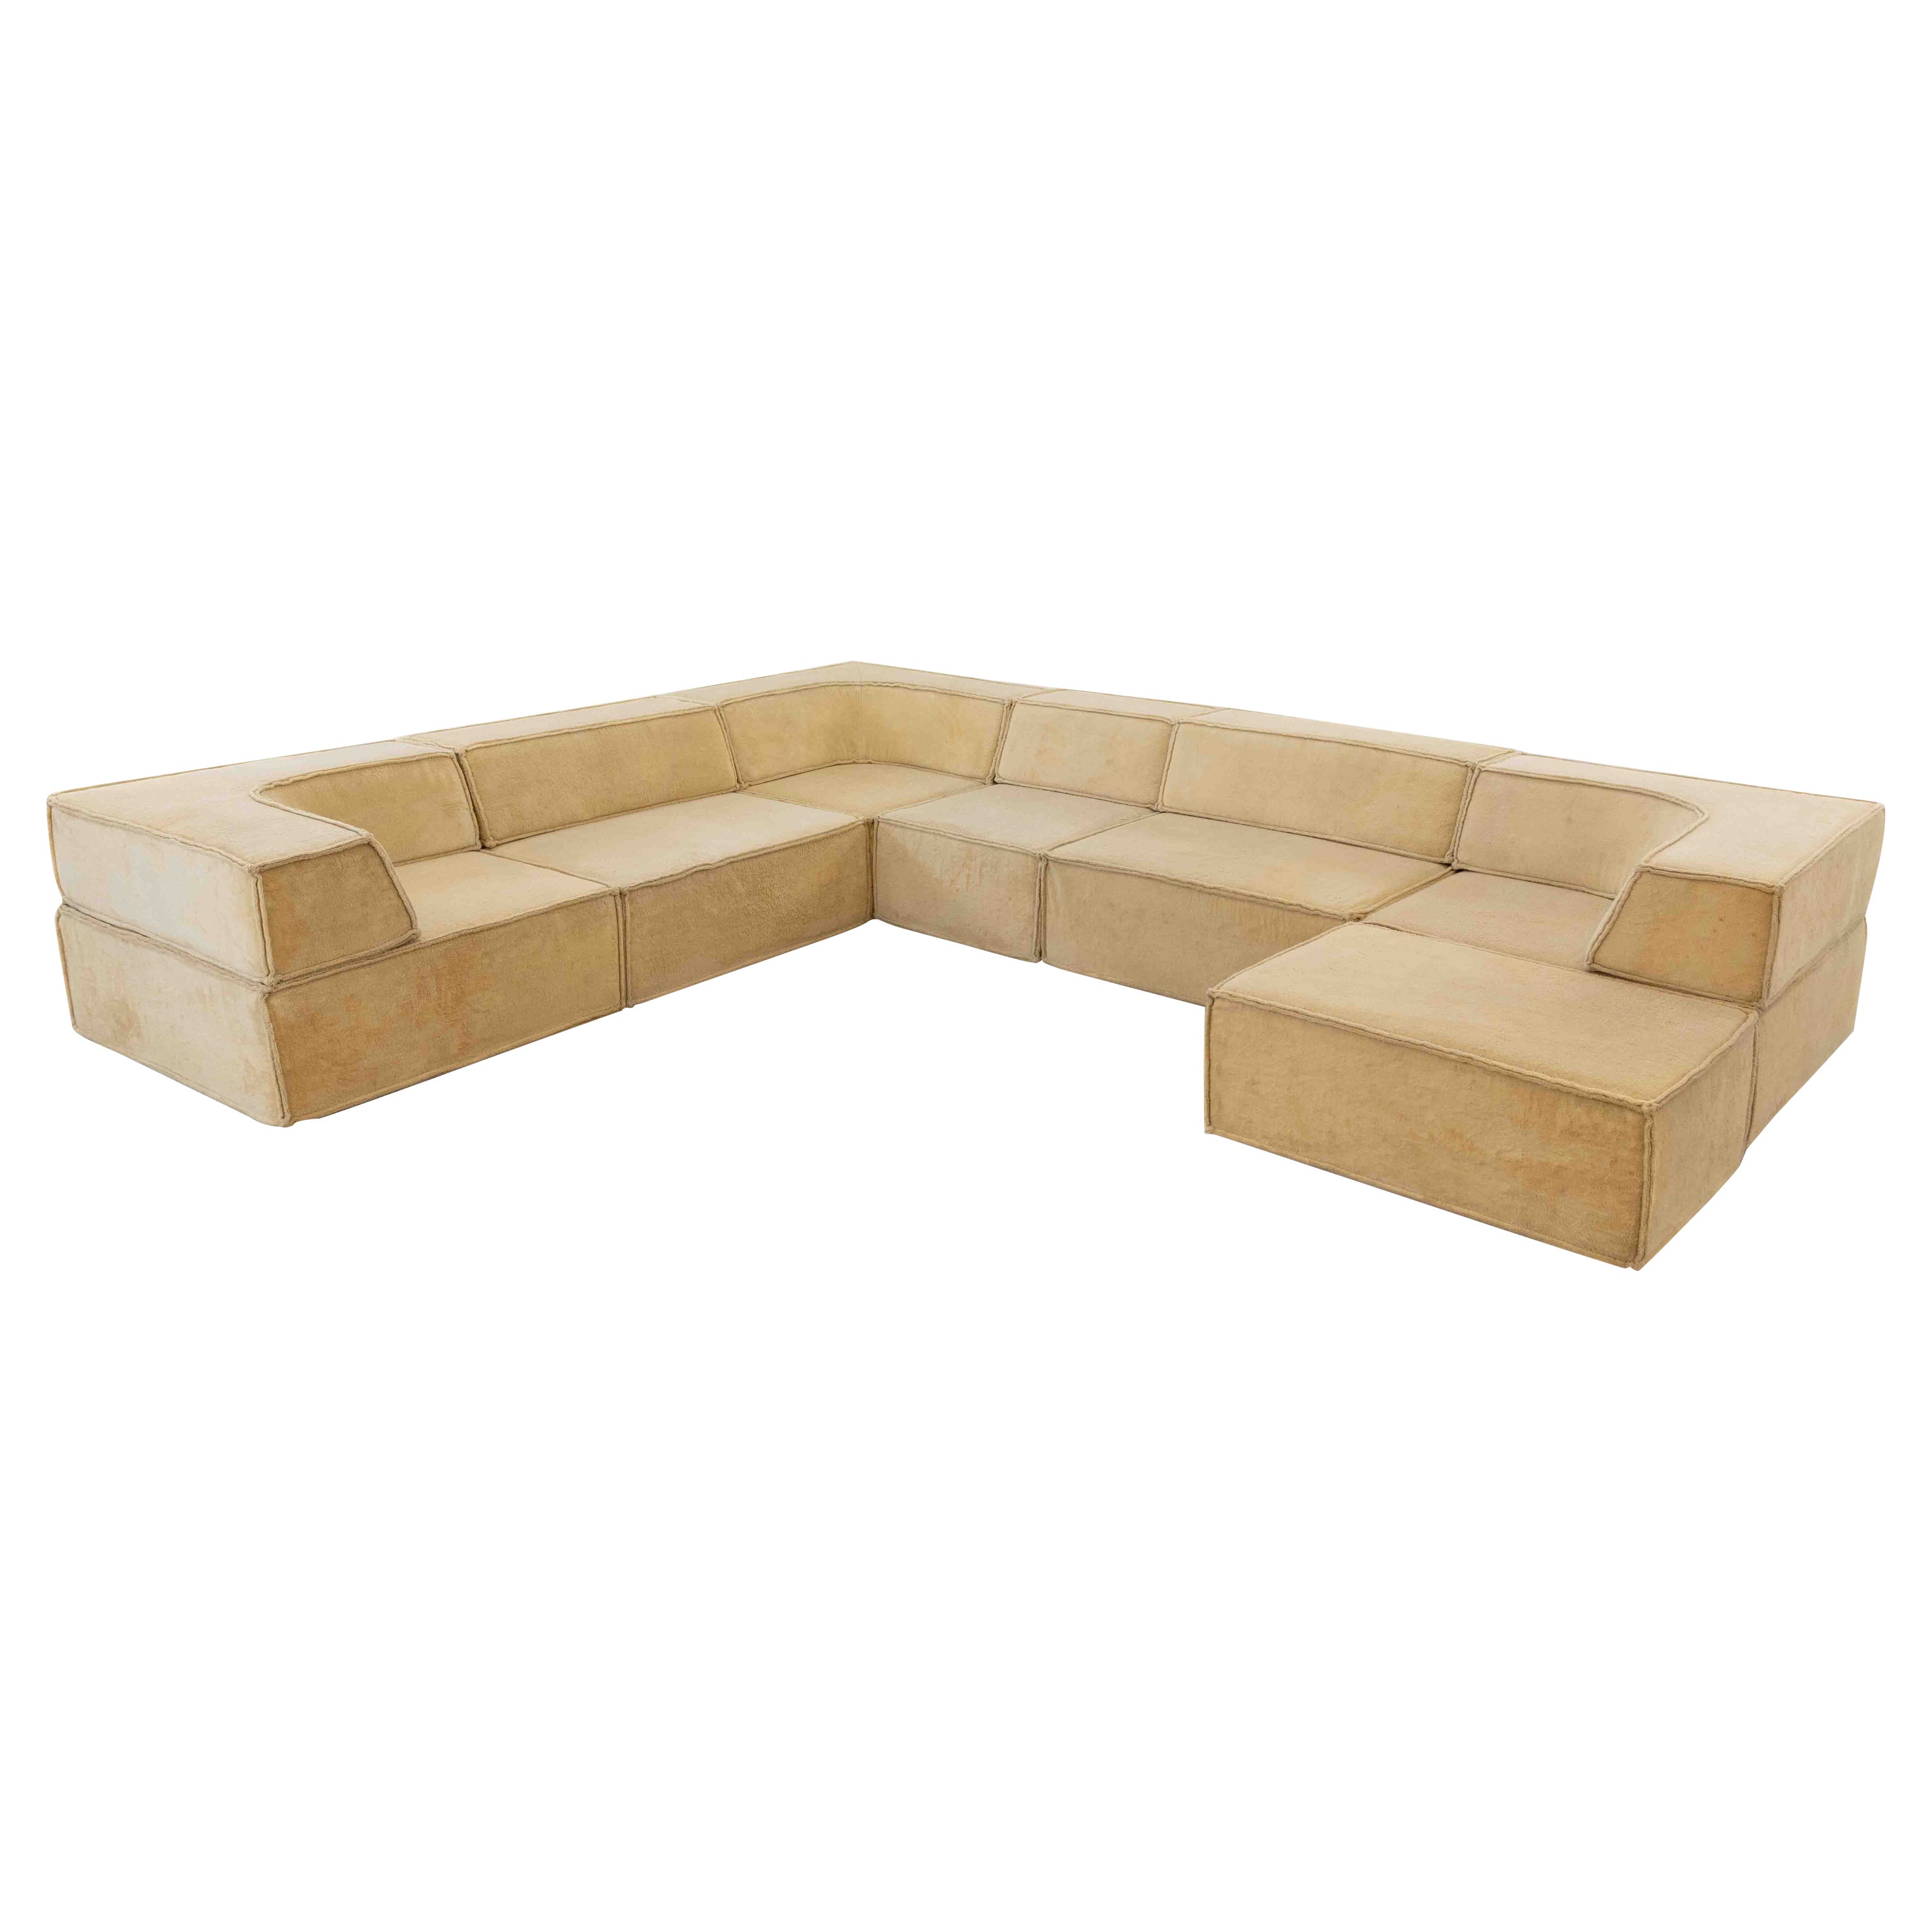 Vintage COR TRIO Sectional Sofa by Team Form AG, Switzerland 1973